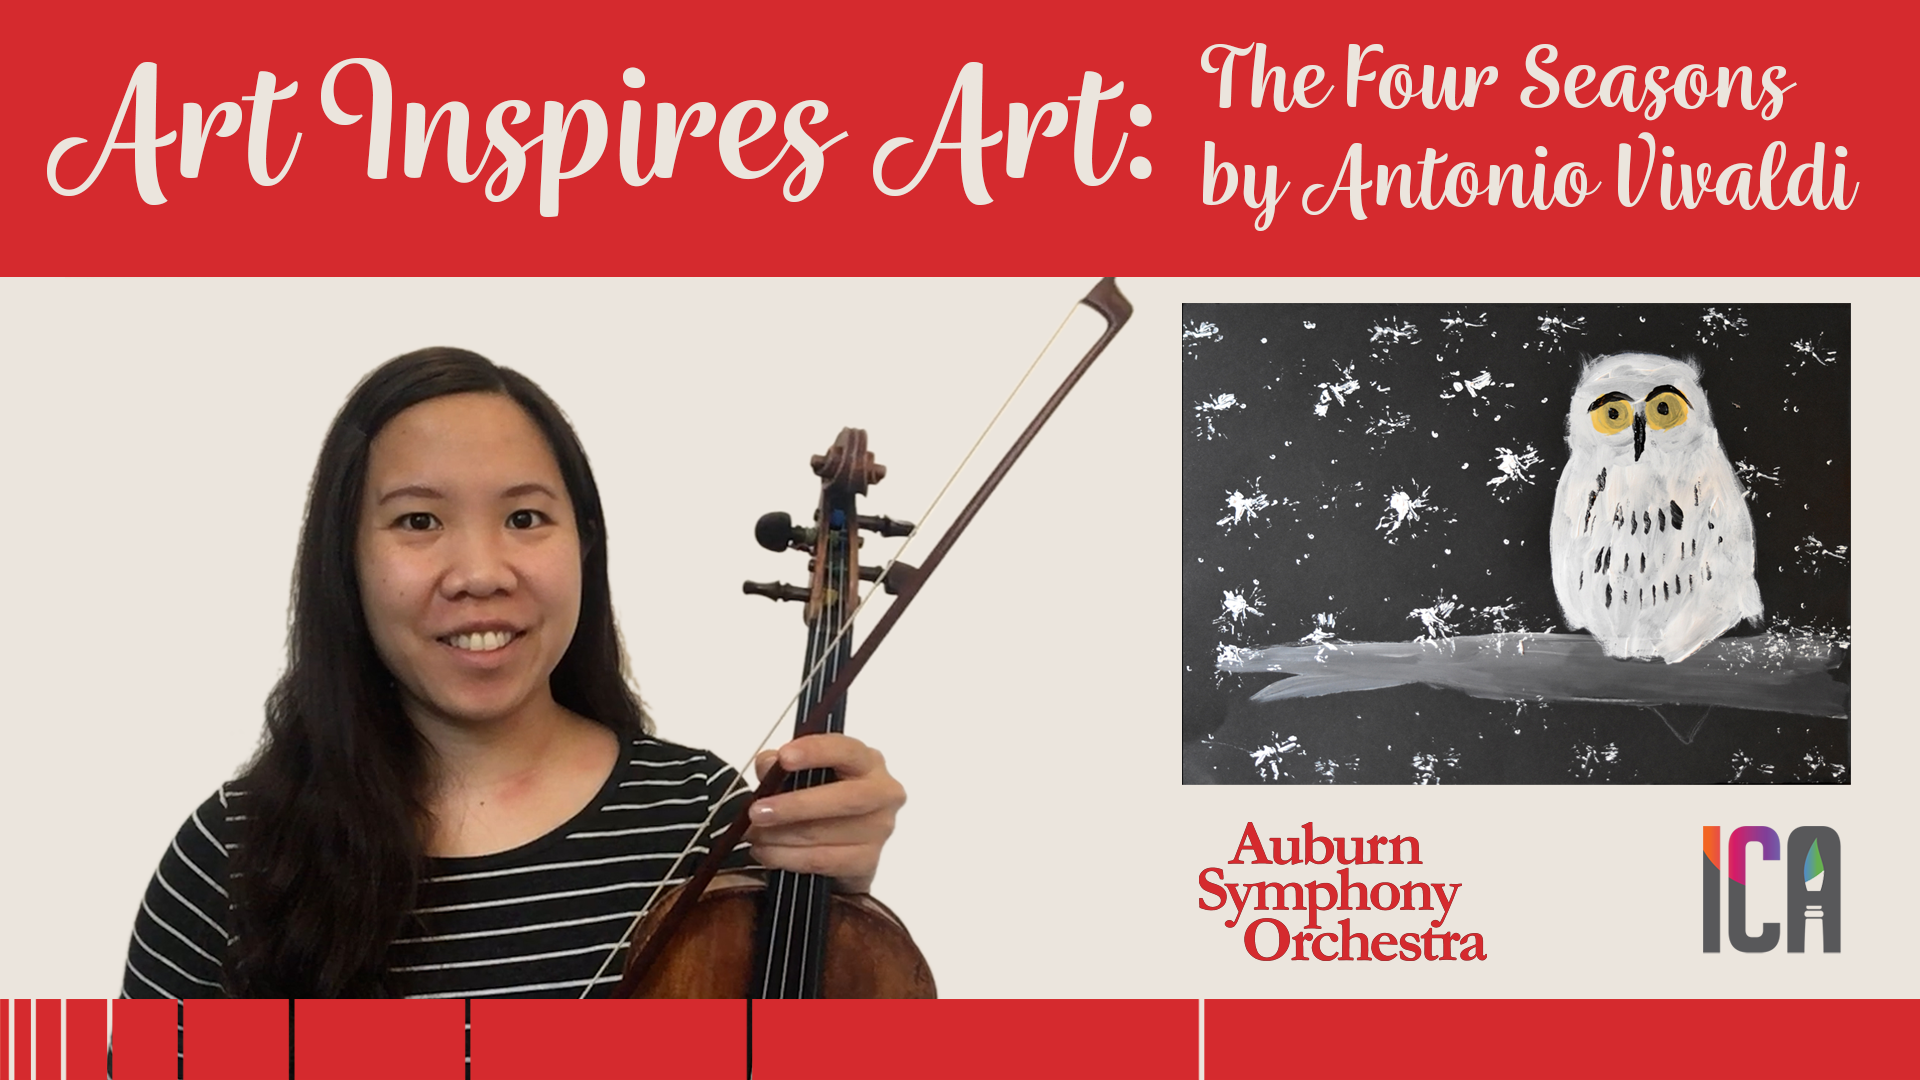 A graphic promoting the Auburn Symphony Orchestra Art Inslires Art performance. Emilie Choi holds a violin and bow in the middle of the graphic, to her right is an inset painting of a white owl in snow on a black background.